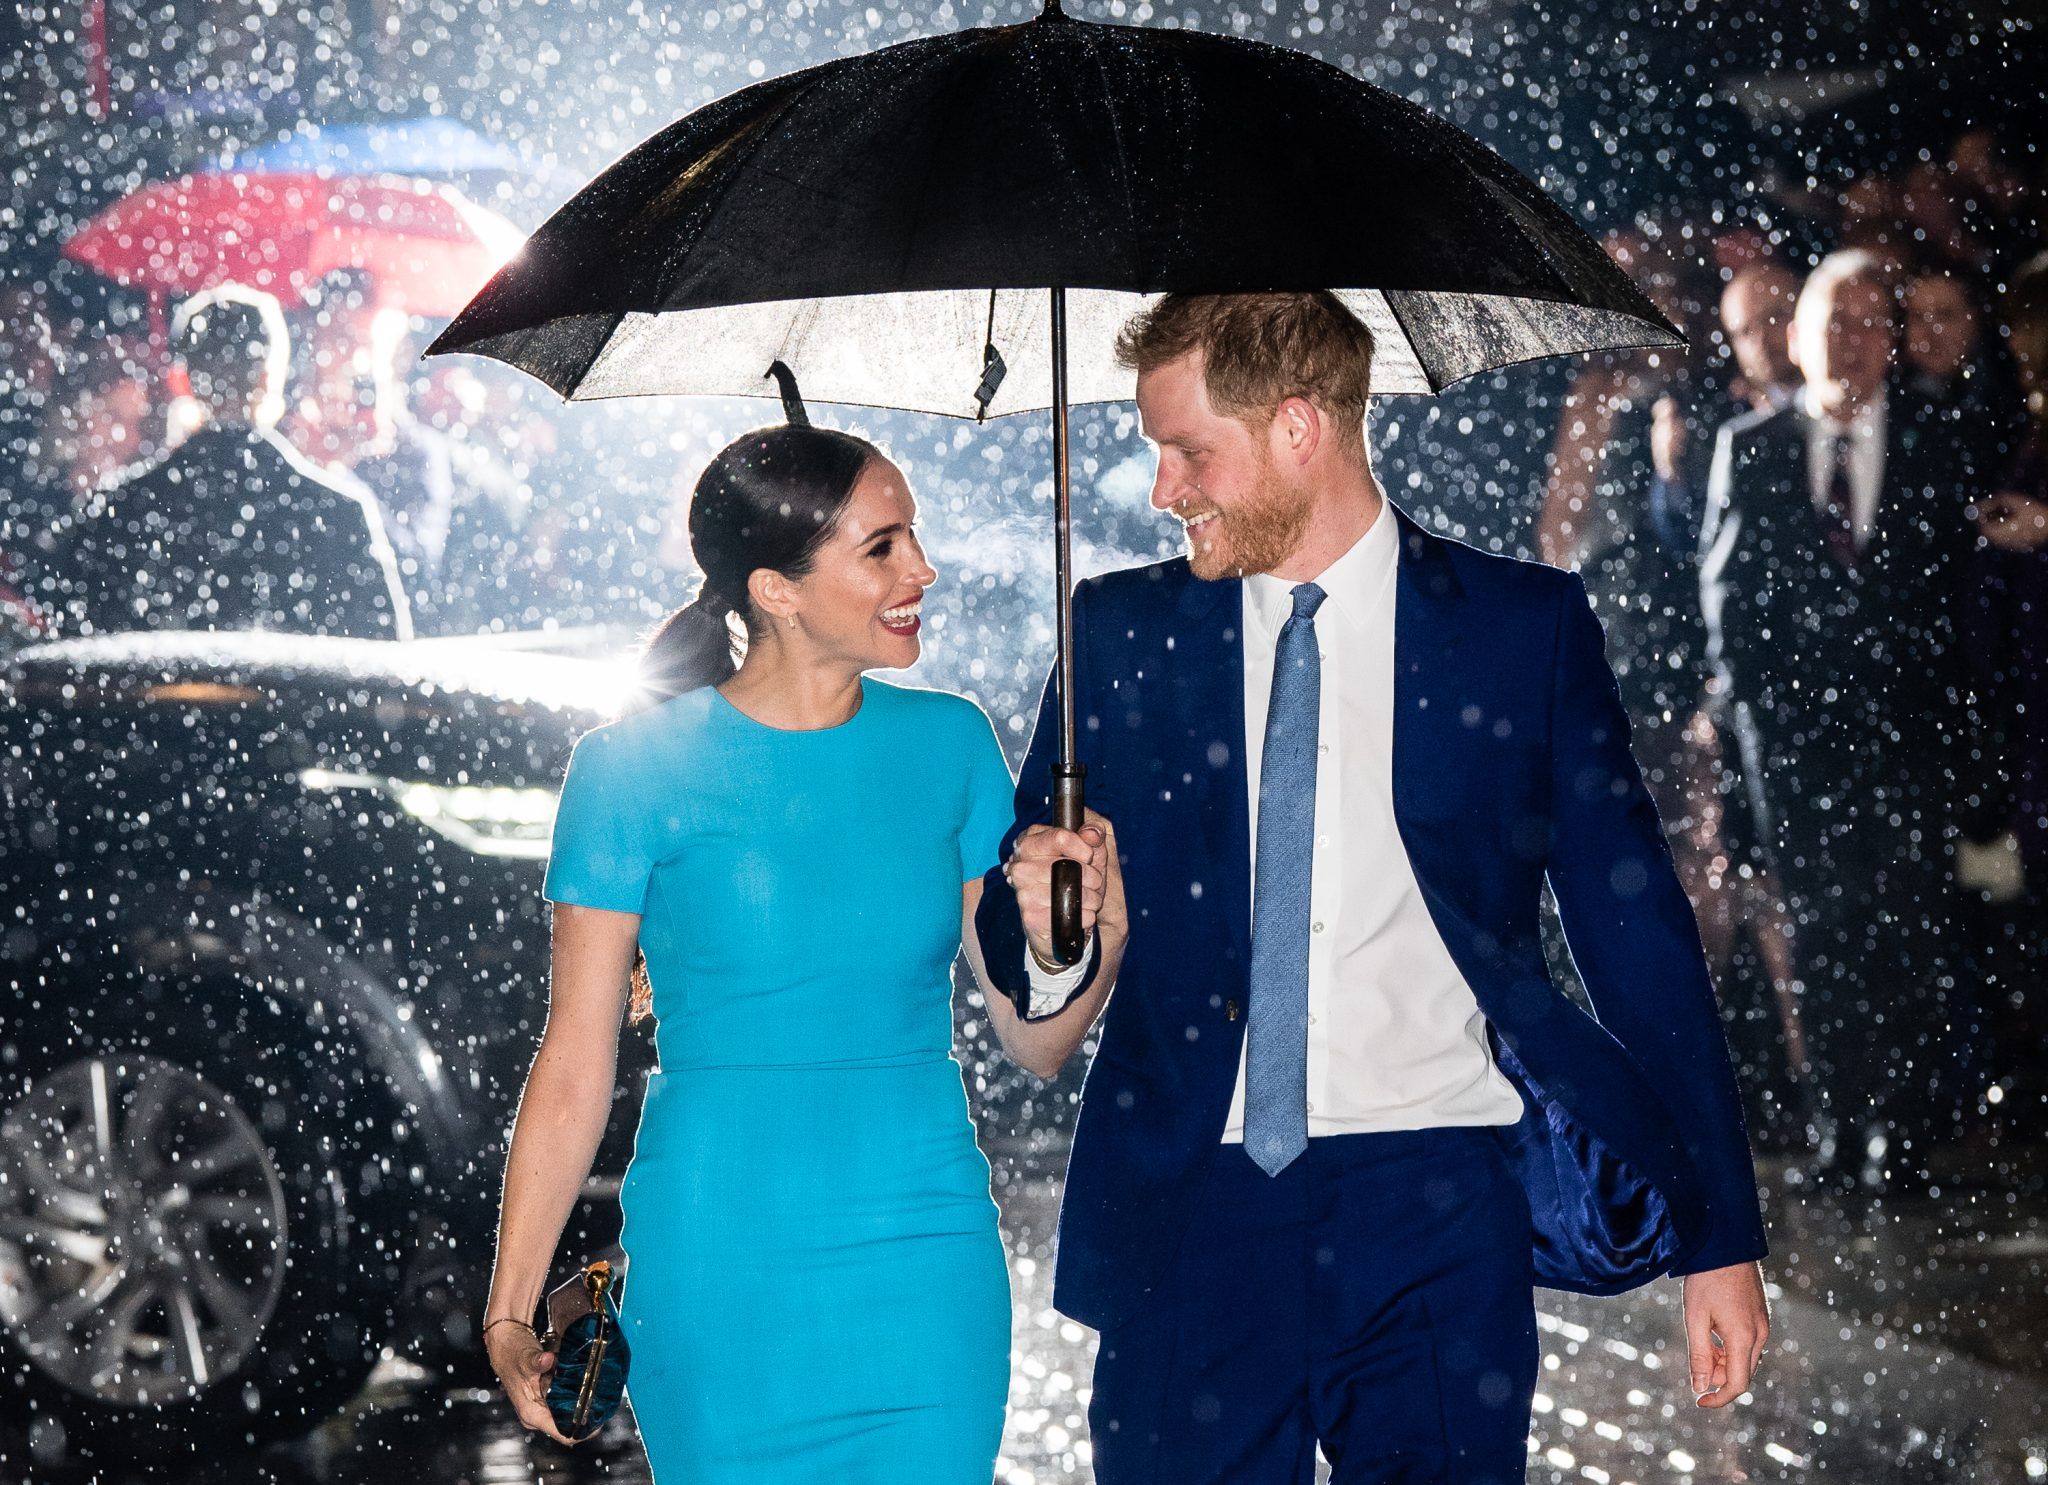 Harry and Meghan under an umbrella in the rain